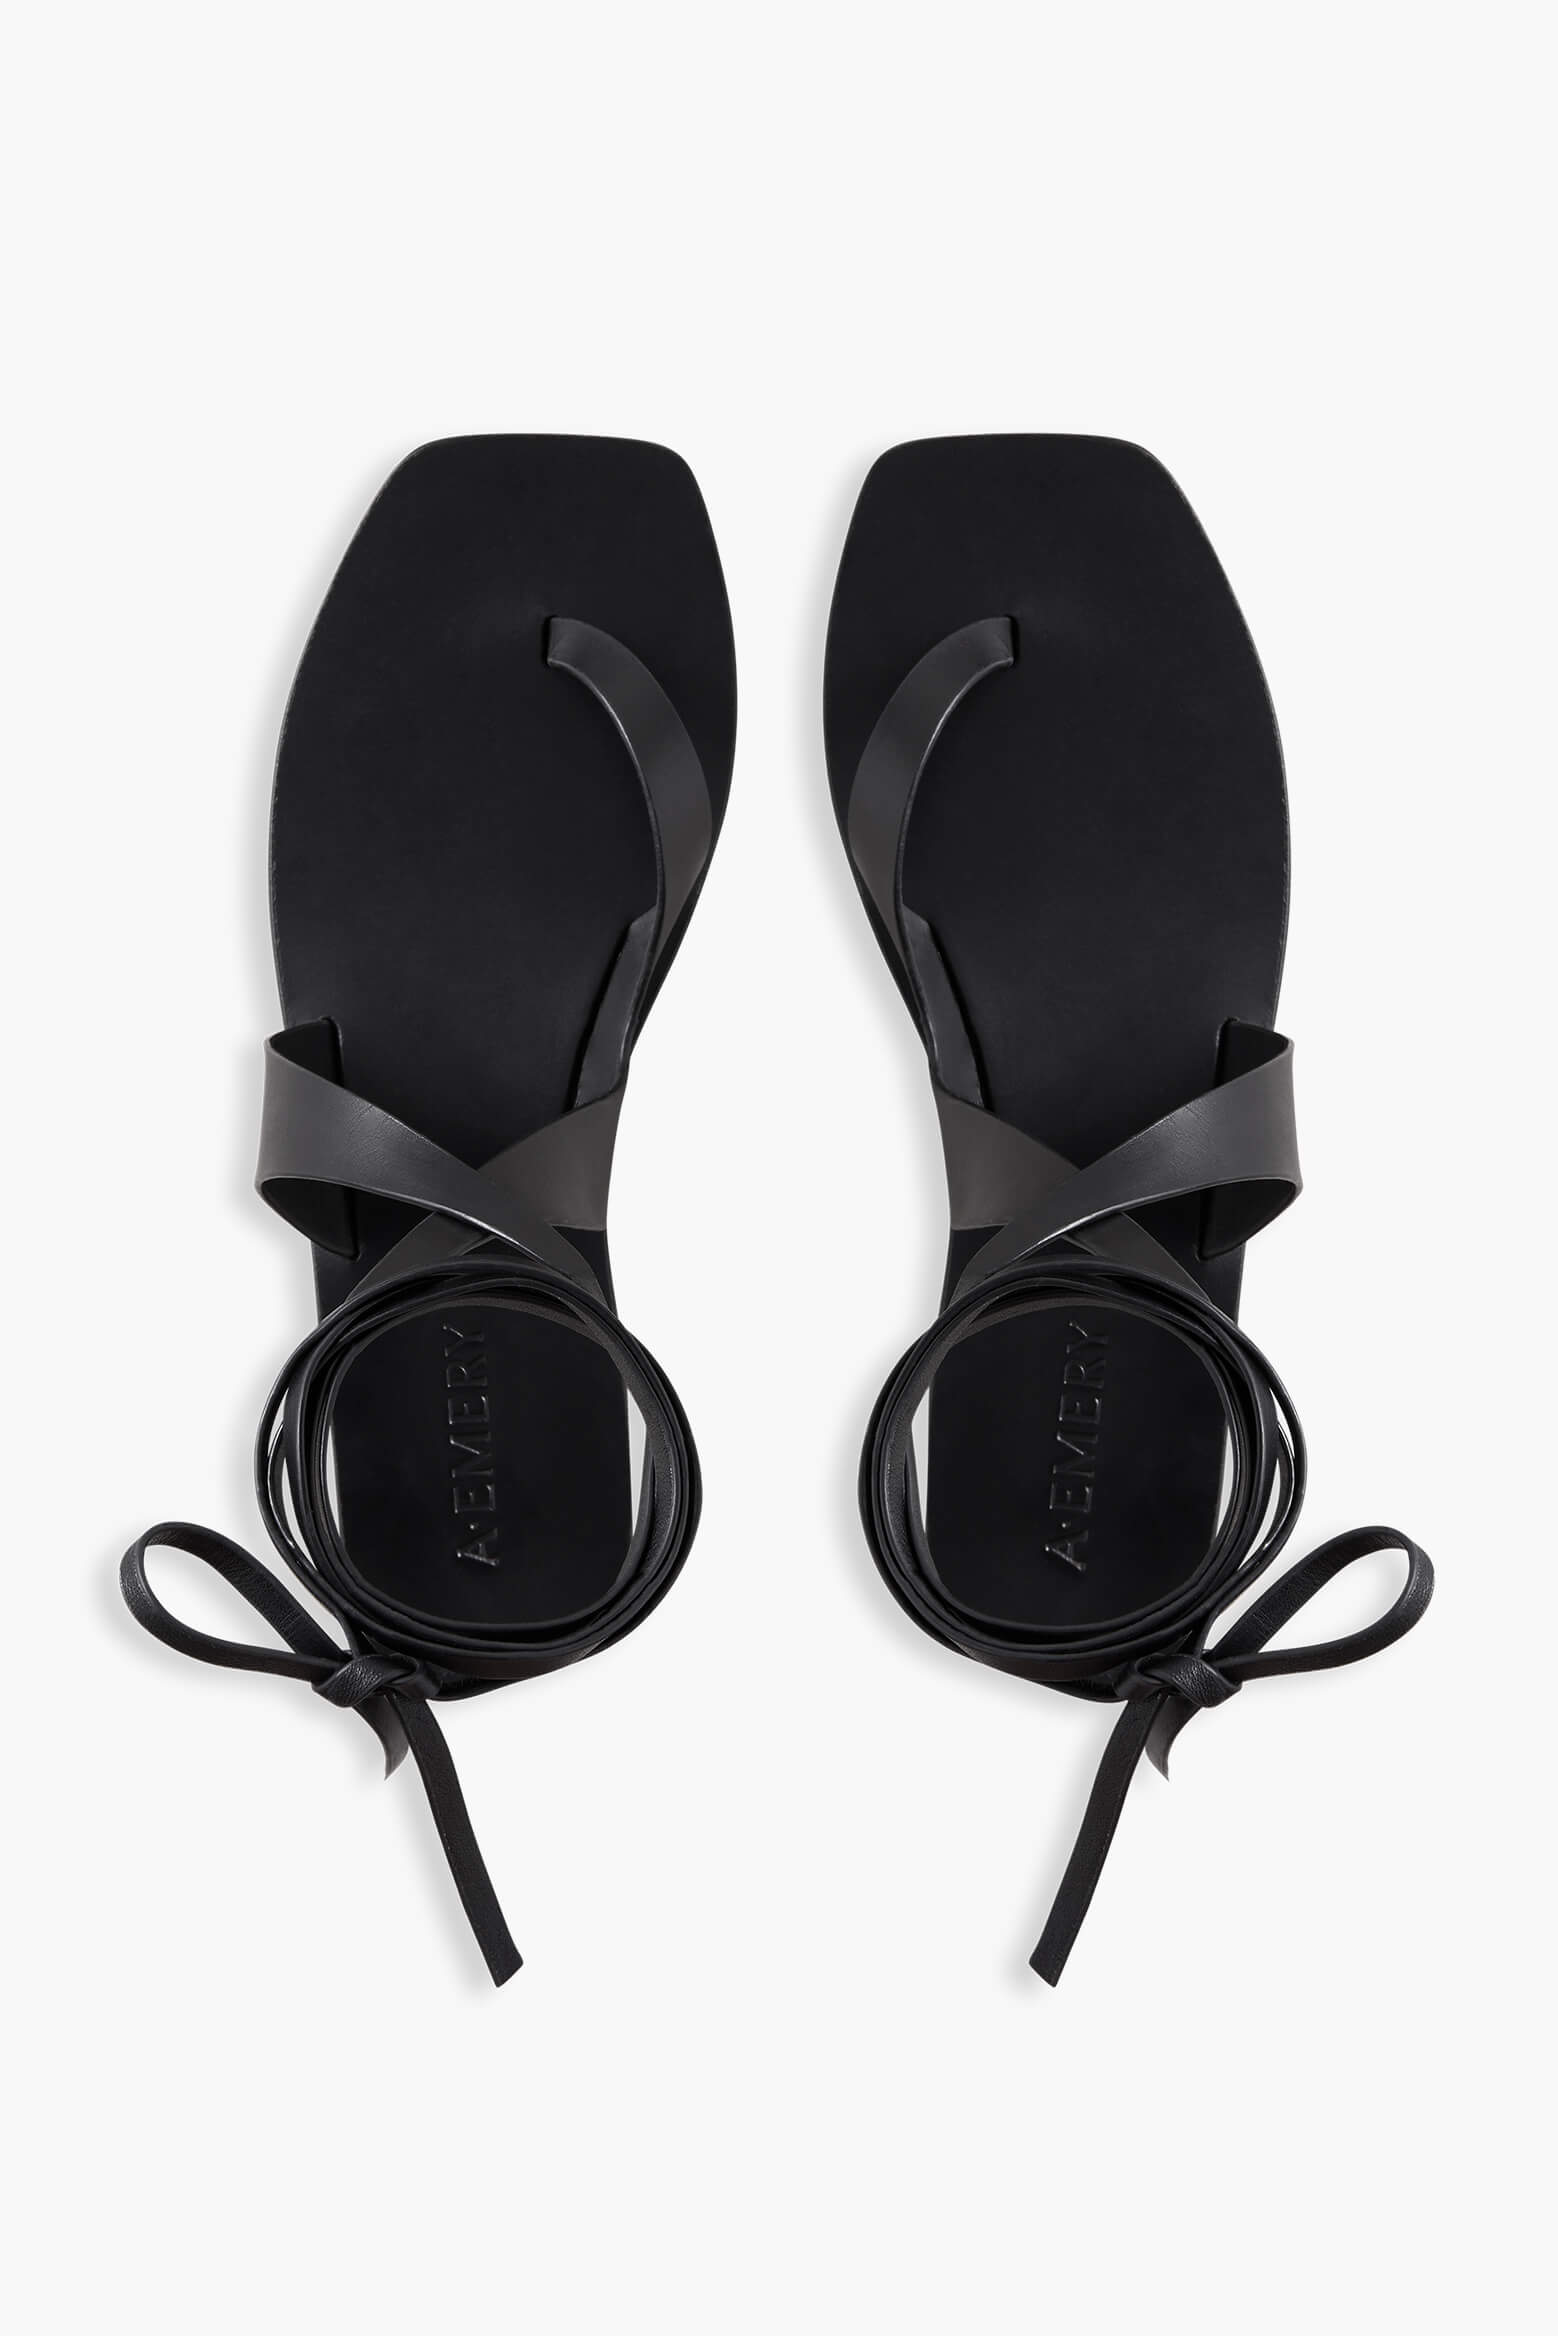 A.Emery Margaux Sandal in Black available at The New Trend Australia.